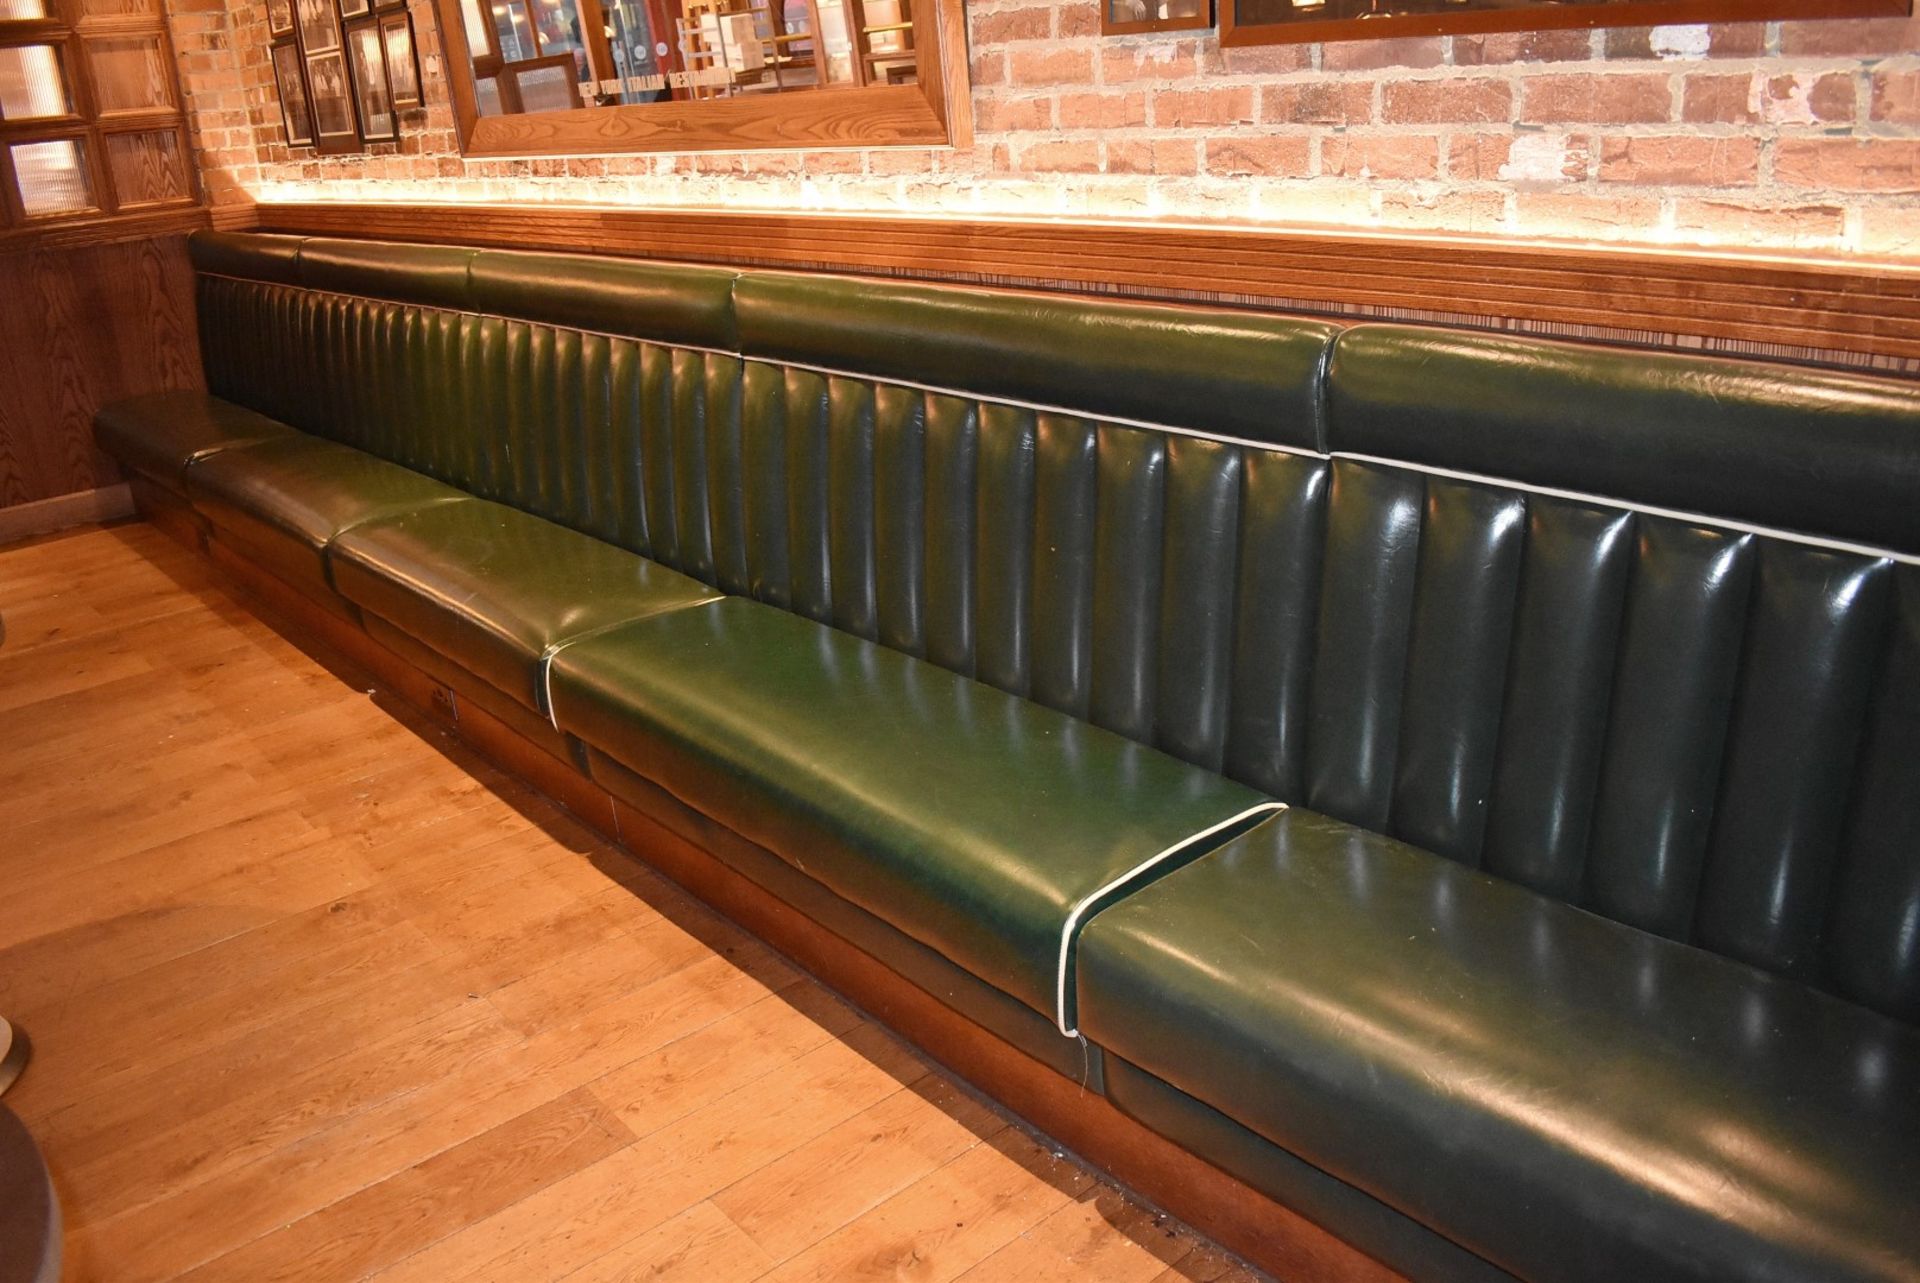 7.1-Metres Of Restaurant Booth Seating (5 x Sections) - Upholstered In Dark Green Faux Leather - Image 2 of 5